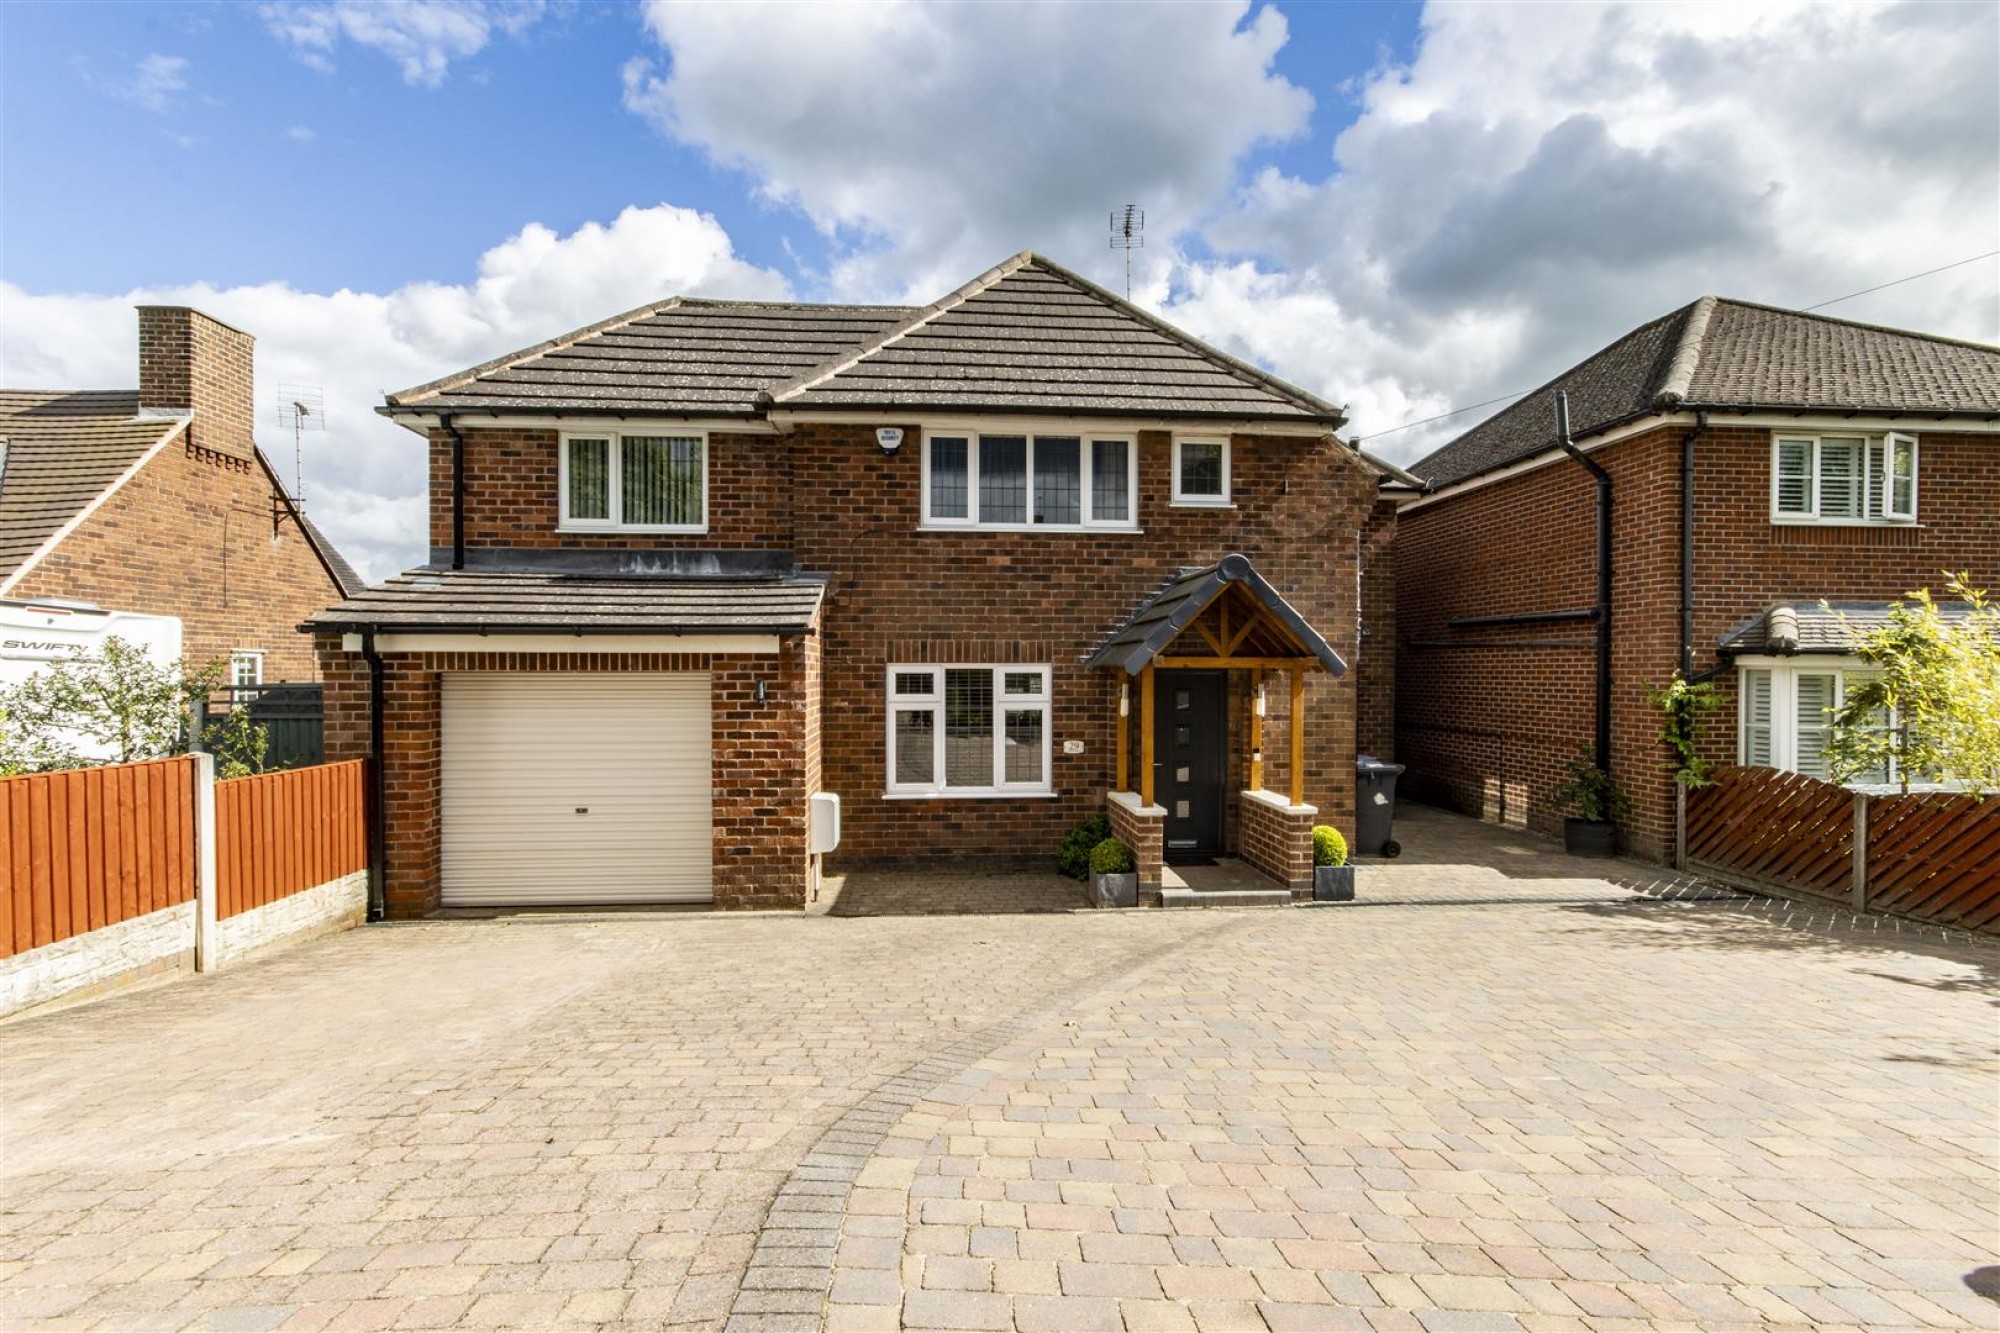 Central Drive, Wingerworth, Chesterfield